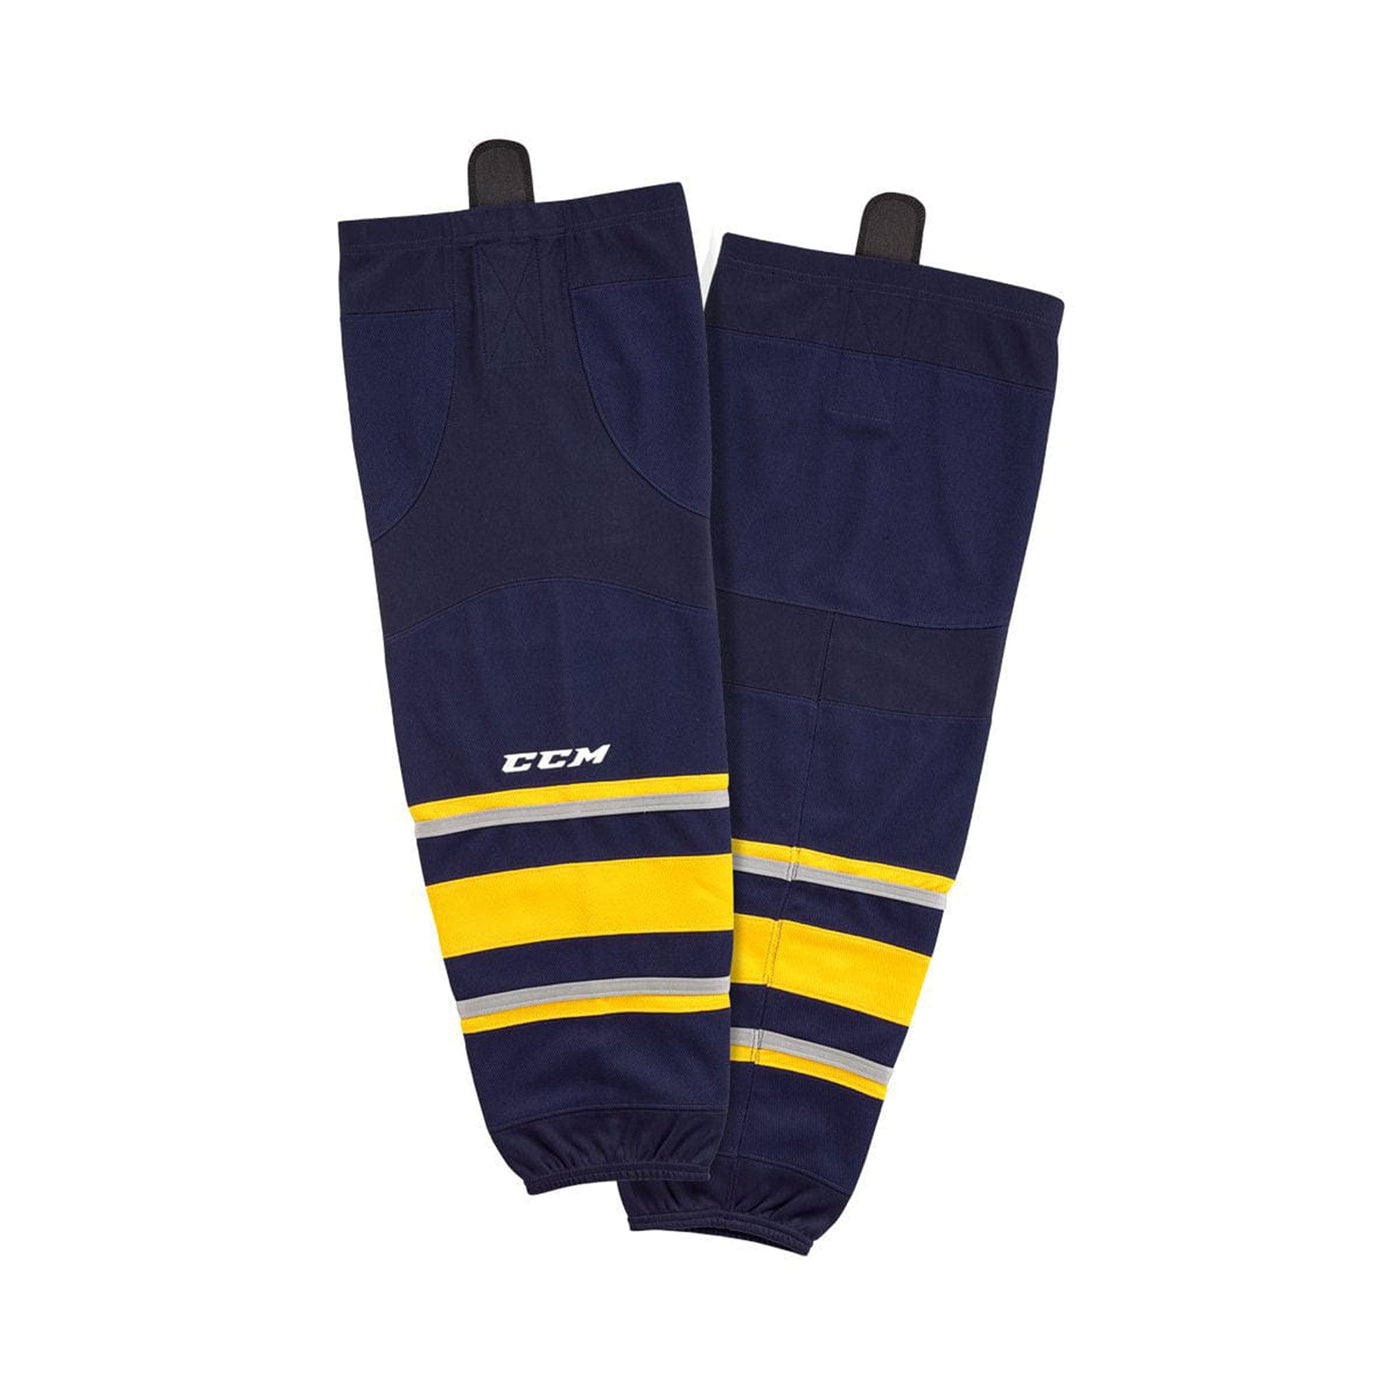 Buffalo Sabres Home CCM Quicklite 8000 Hockey Socks - The Hockey Shop Source For Sports